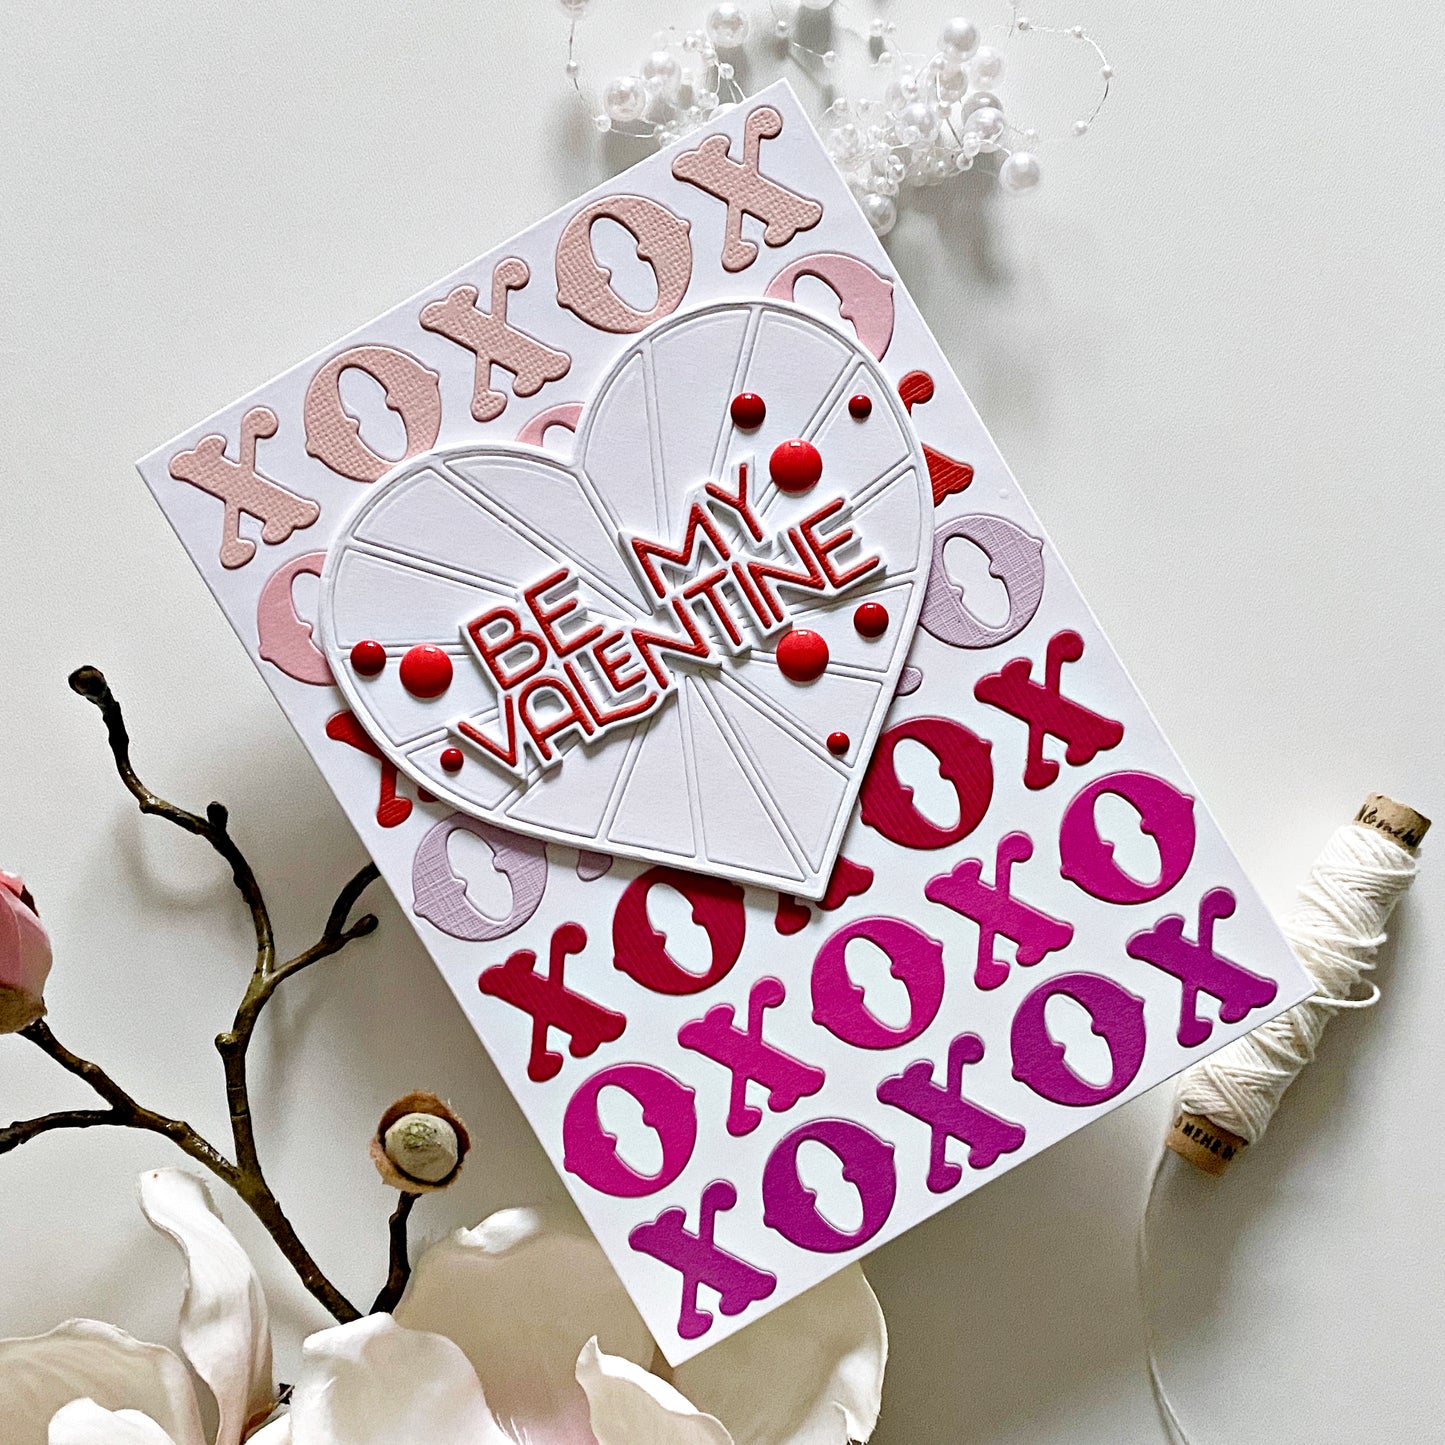 XOXO Background 5x7" Cover Plate by Paige Taylor Evans